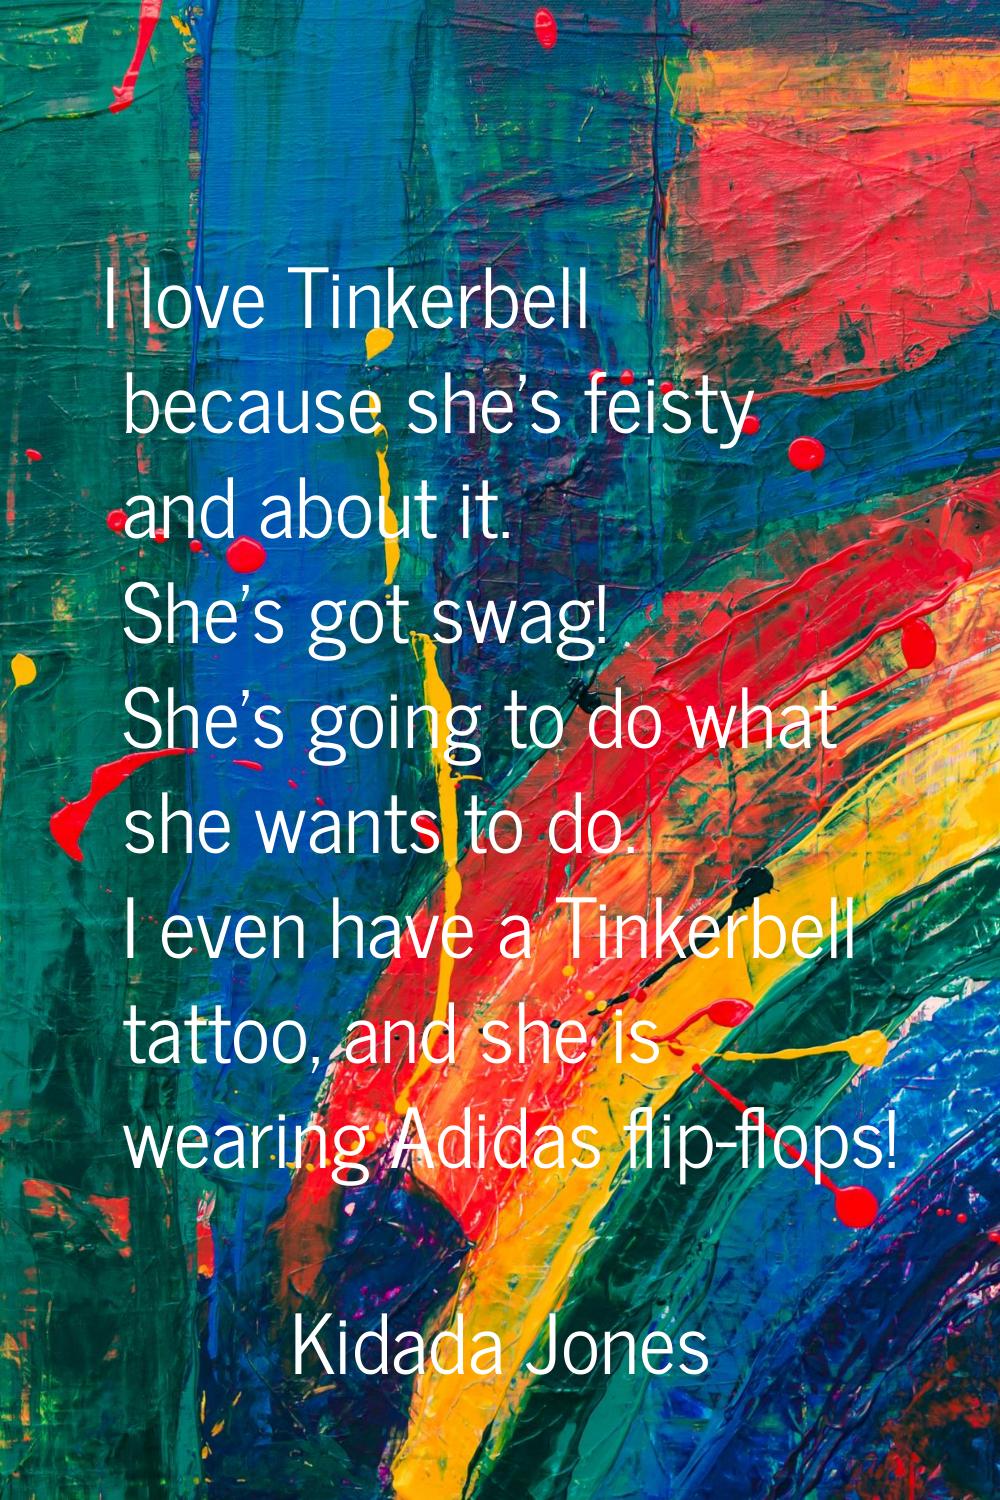 I love Tinkerbell because she's feisty and about it. She's got swag! She's going to do what she wan